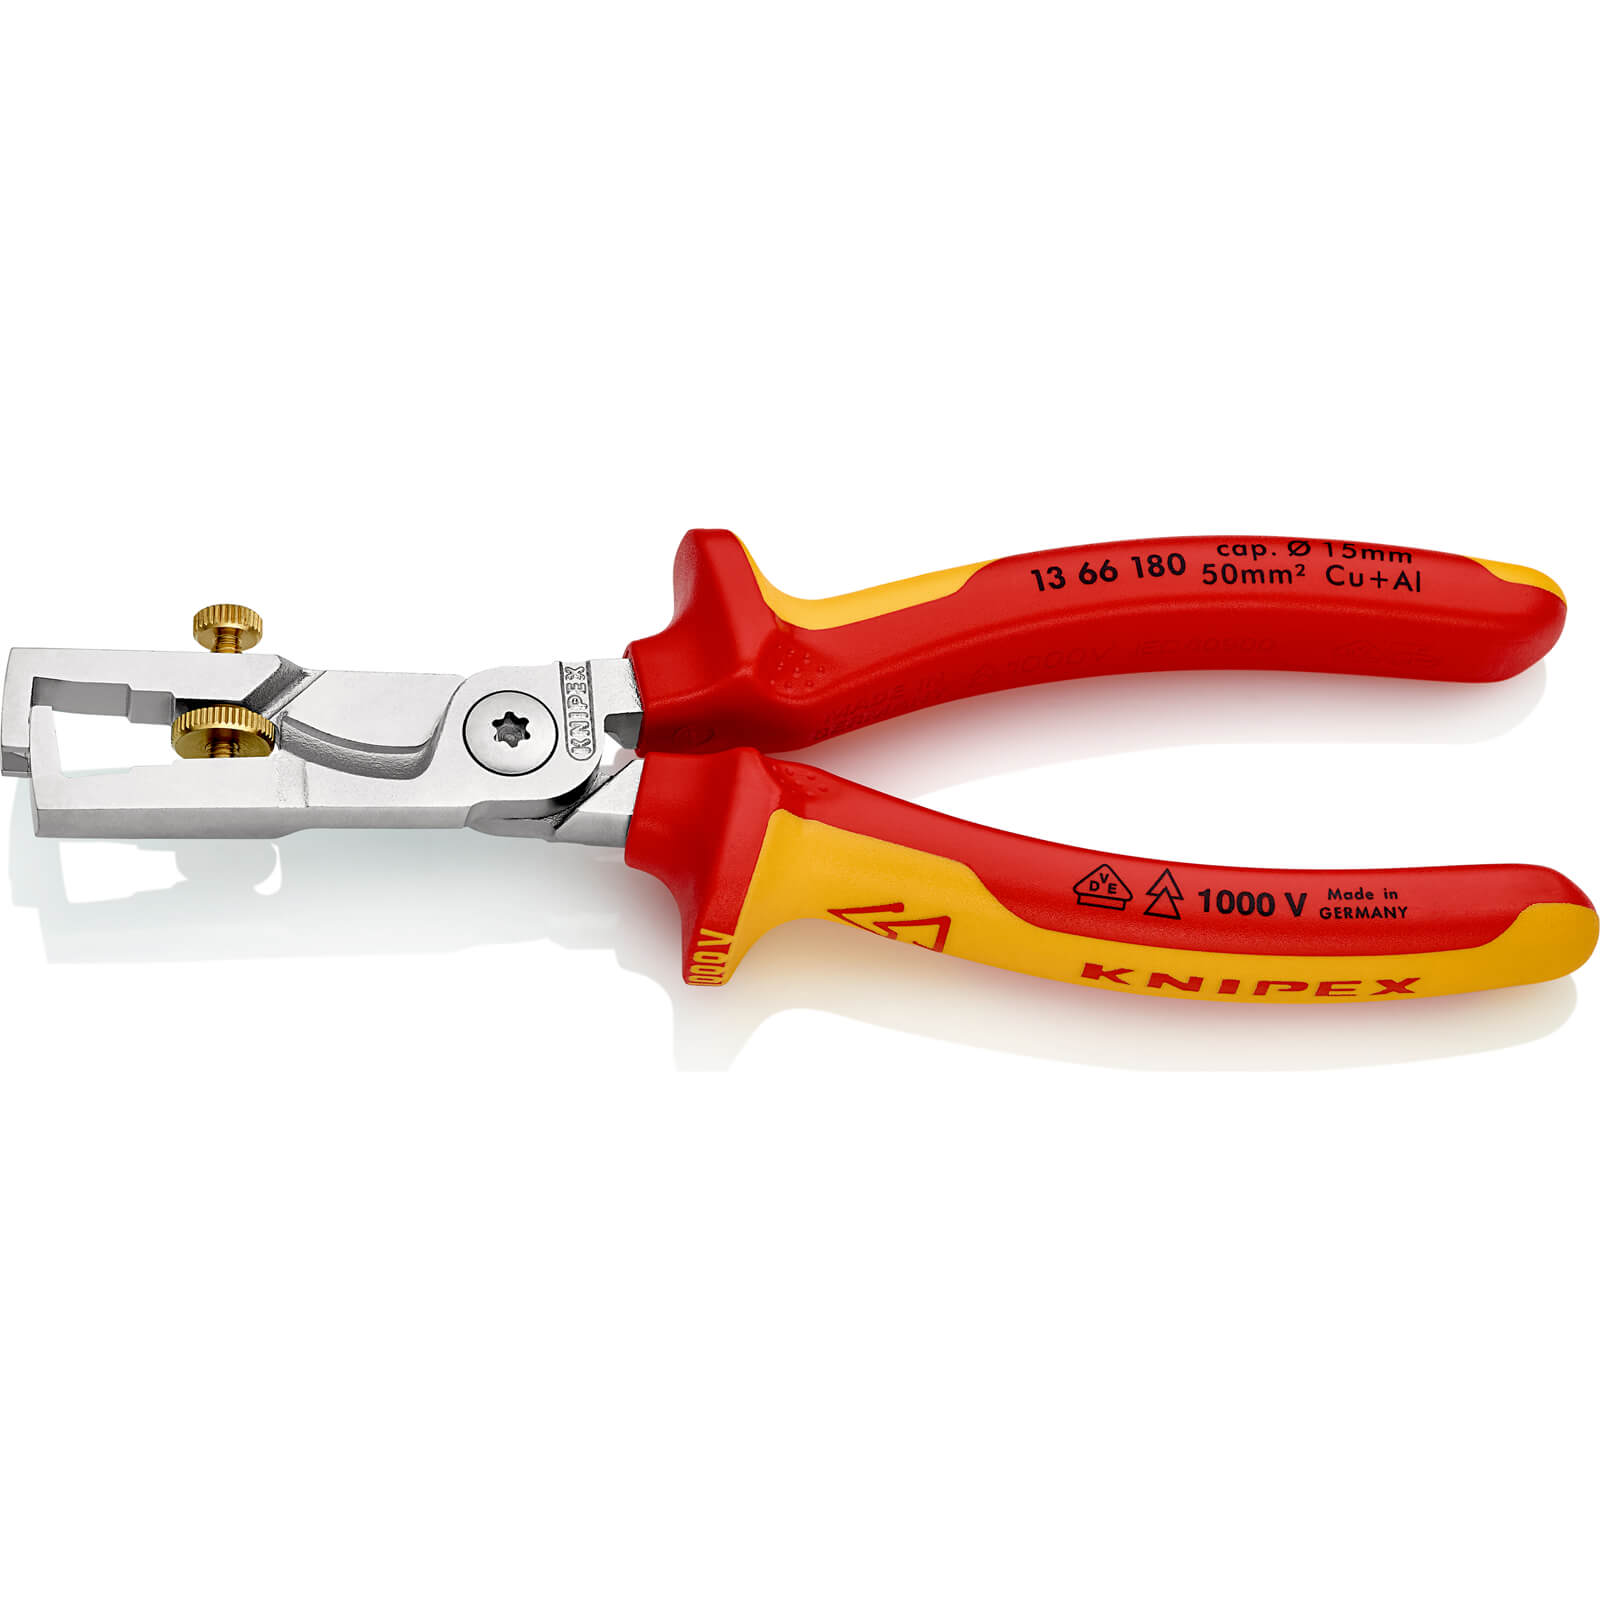 Photos - Crimper / Stripper KNIPEX 13 66 StriX VDE Wire Stripper and Cable Shears Pliers 13 66 180 